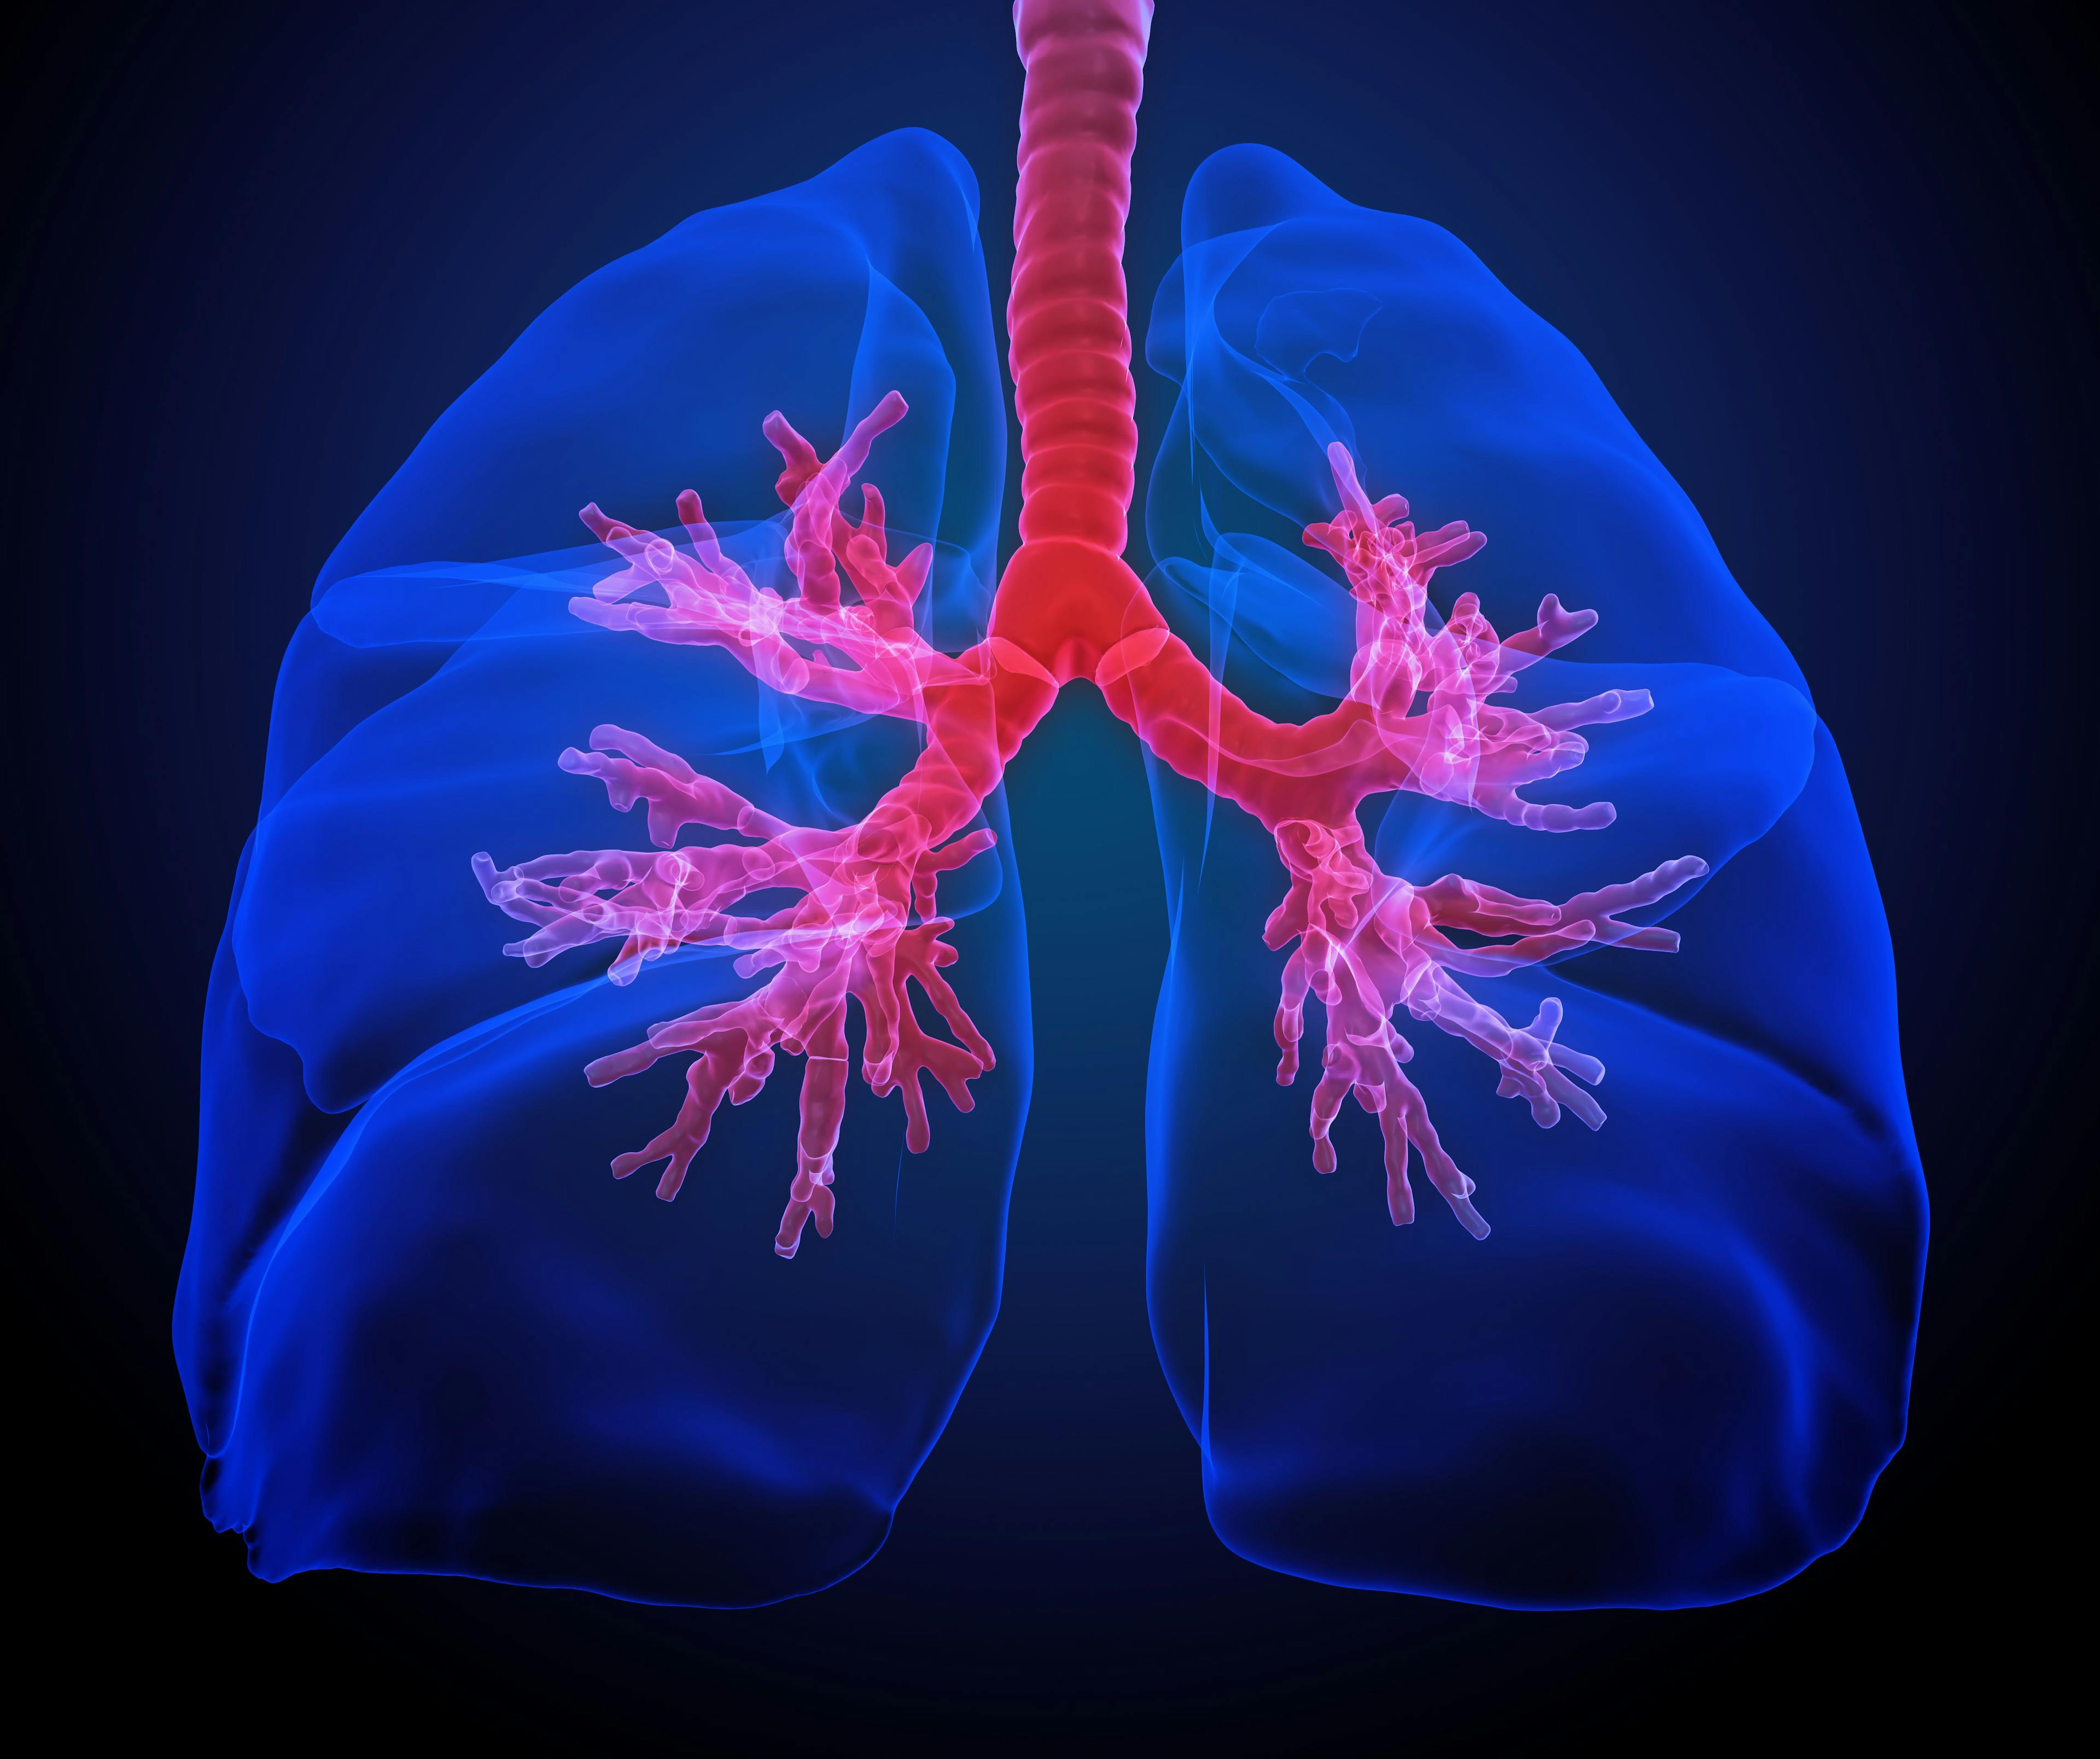 3D illustration of lungs: © Mopic - stock.adobe.com